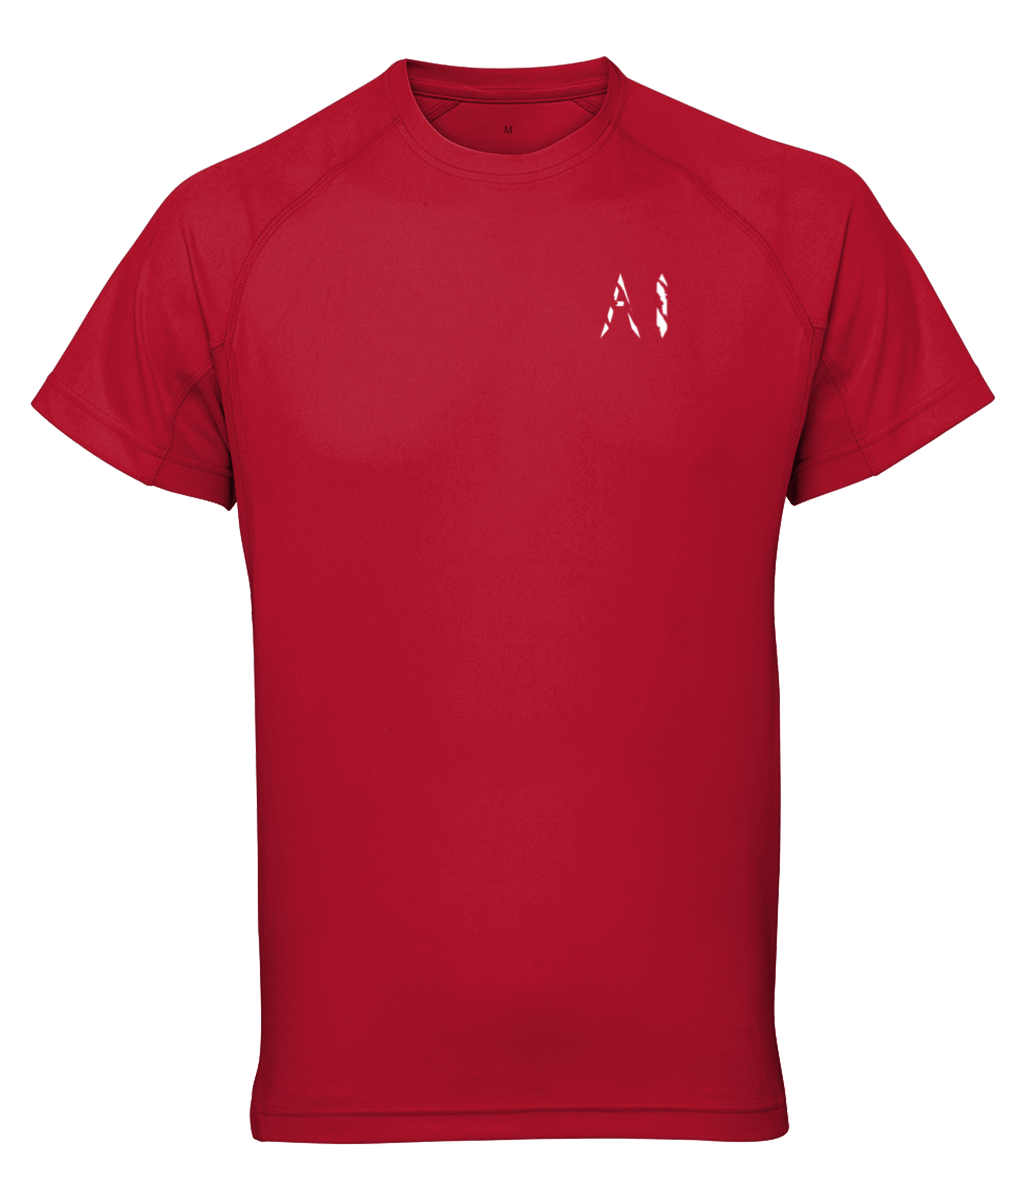 Mens Red Athletic Performance Top with White AI logo on the left chest